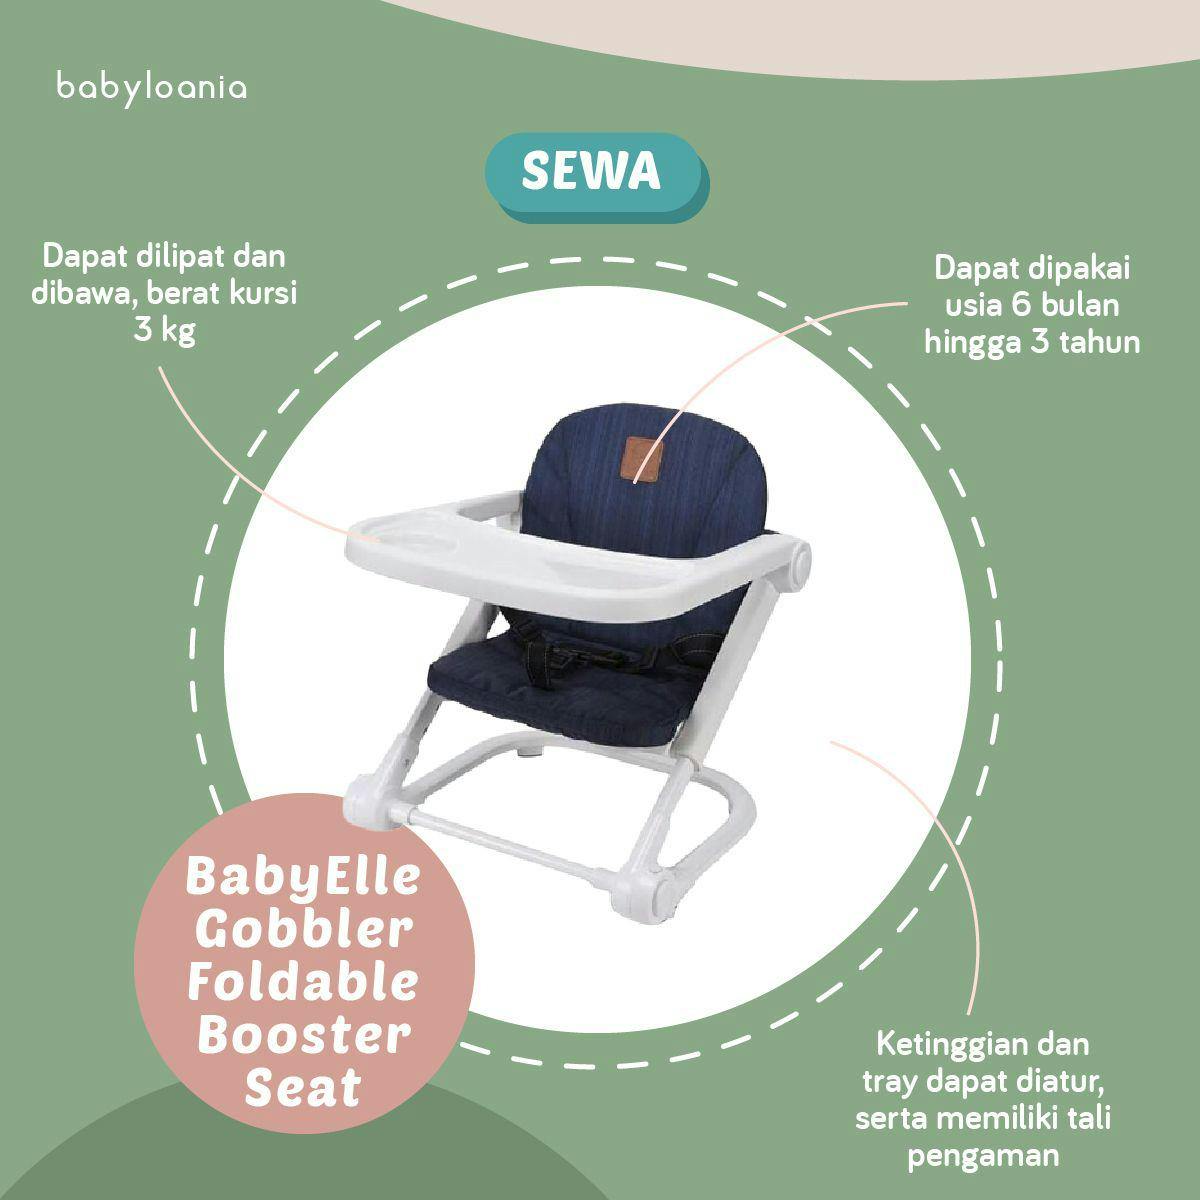 Gobbler Foldable Booster Seat